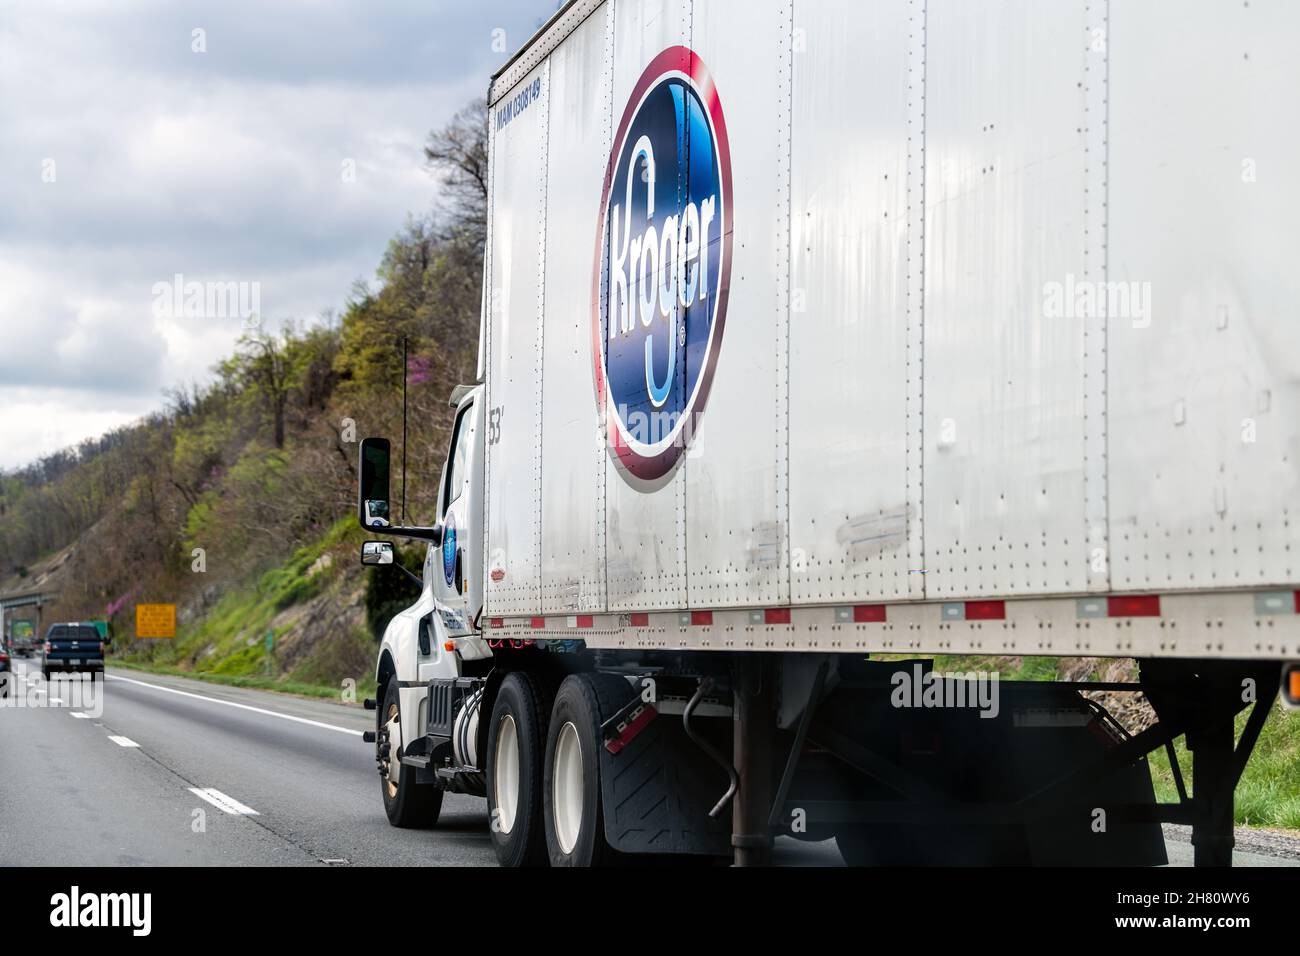 Charlottesville, USA - April 15, 2021: Highway road in Virginia with Kroger delivery shipping cargo truck in traffic closeup of logo on side of vehicl Stock Photo